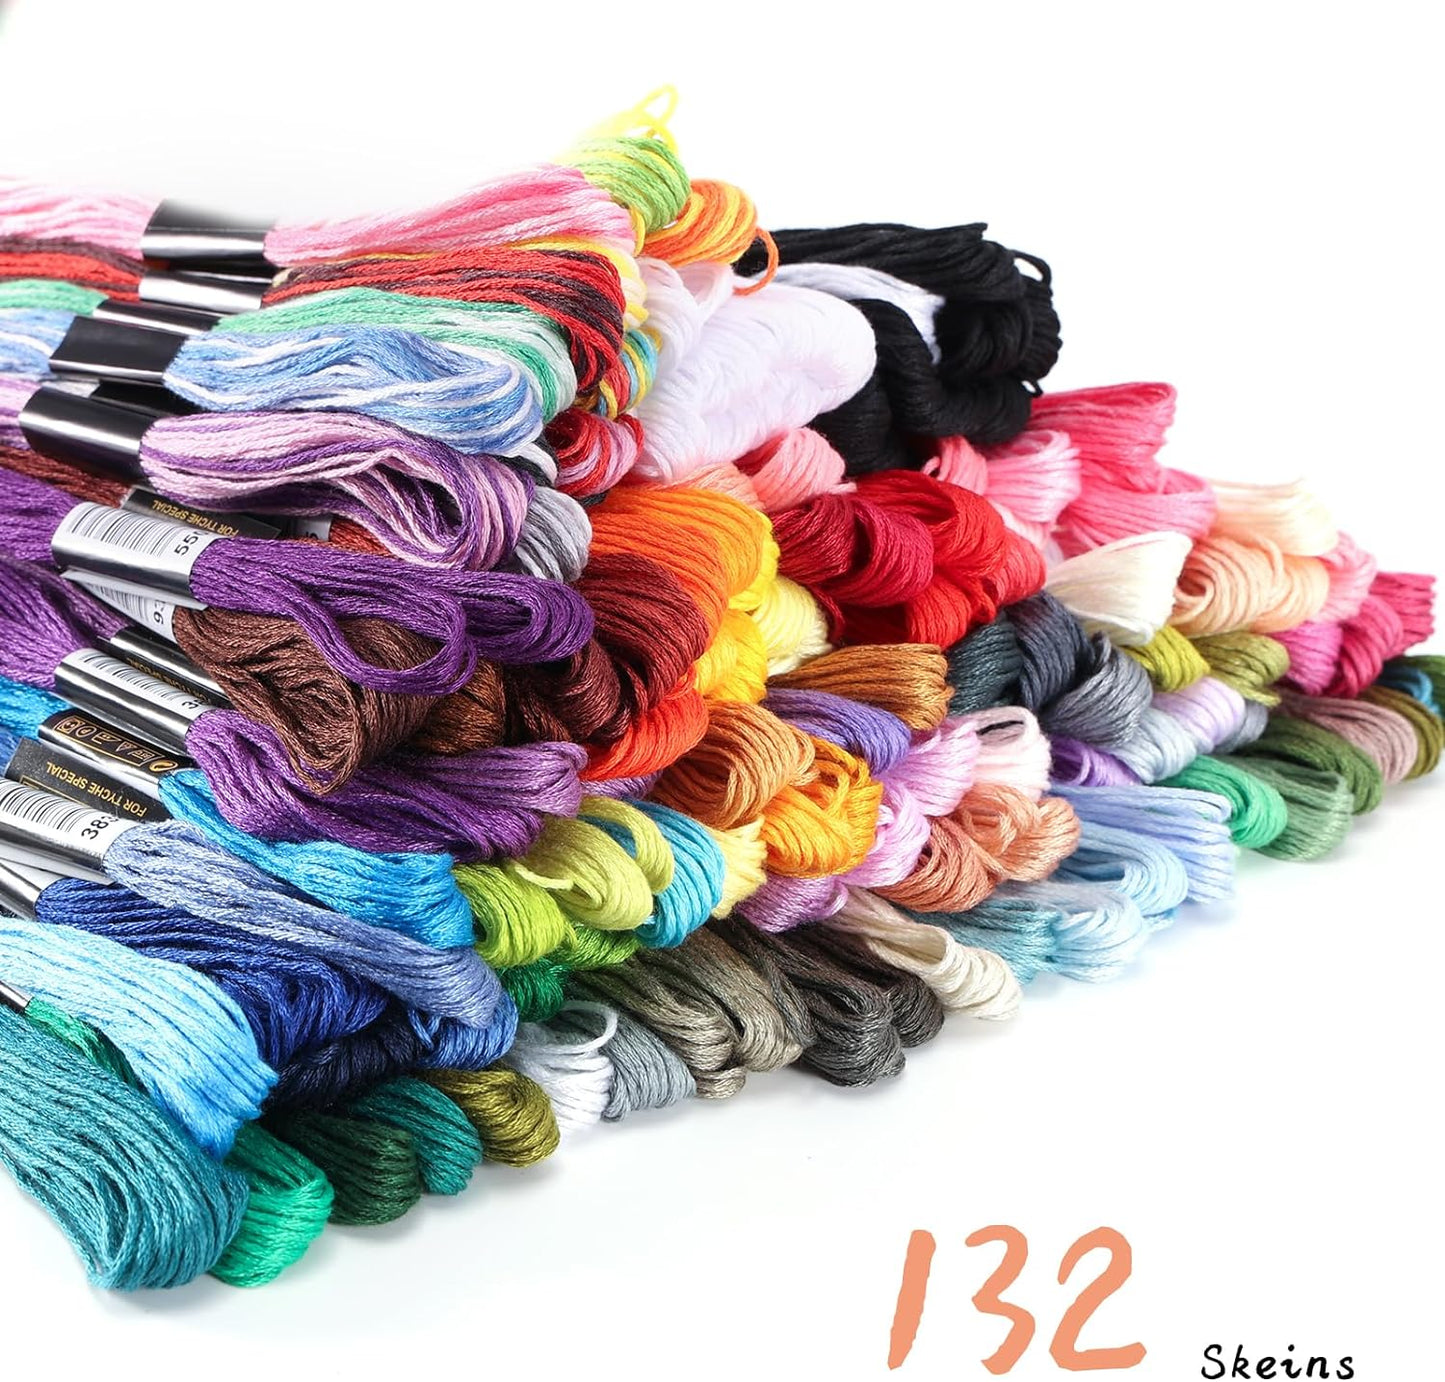 100 Colors Embroidery Floss and 12 Skeins Variegated & 10 Skeins White & 10 Skeins Black Color and 10 PCS Floss Bobbins for Friendship Bracelet Strings Kits, Cross Stitch Sewing Crafts